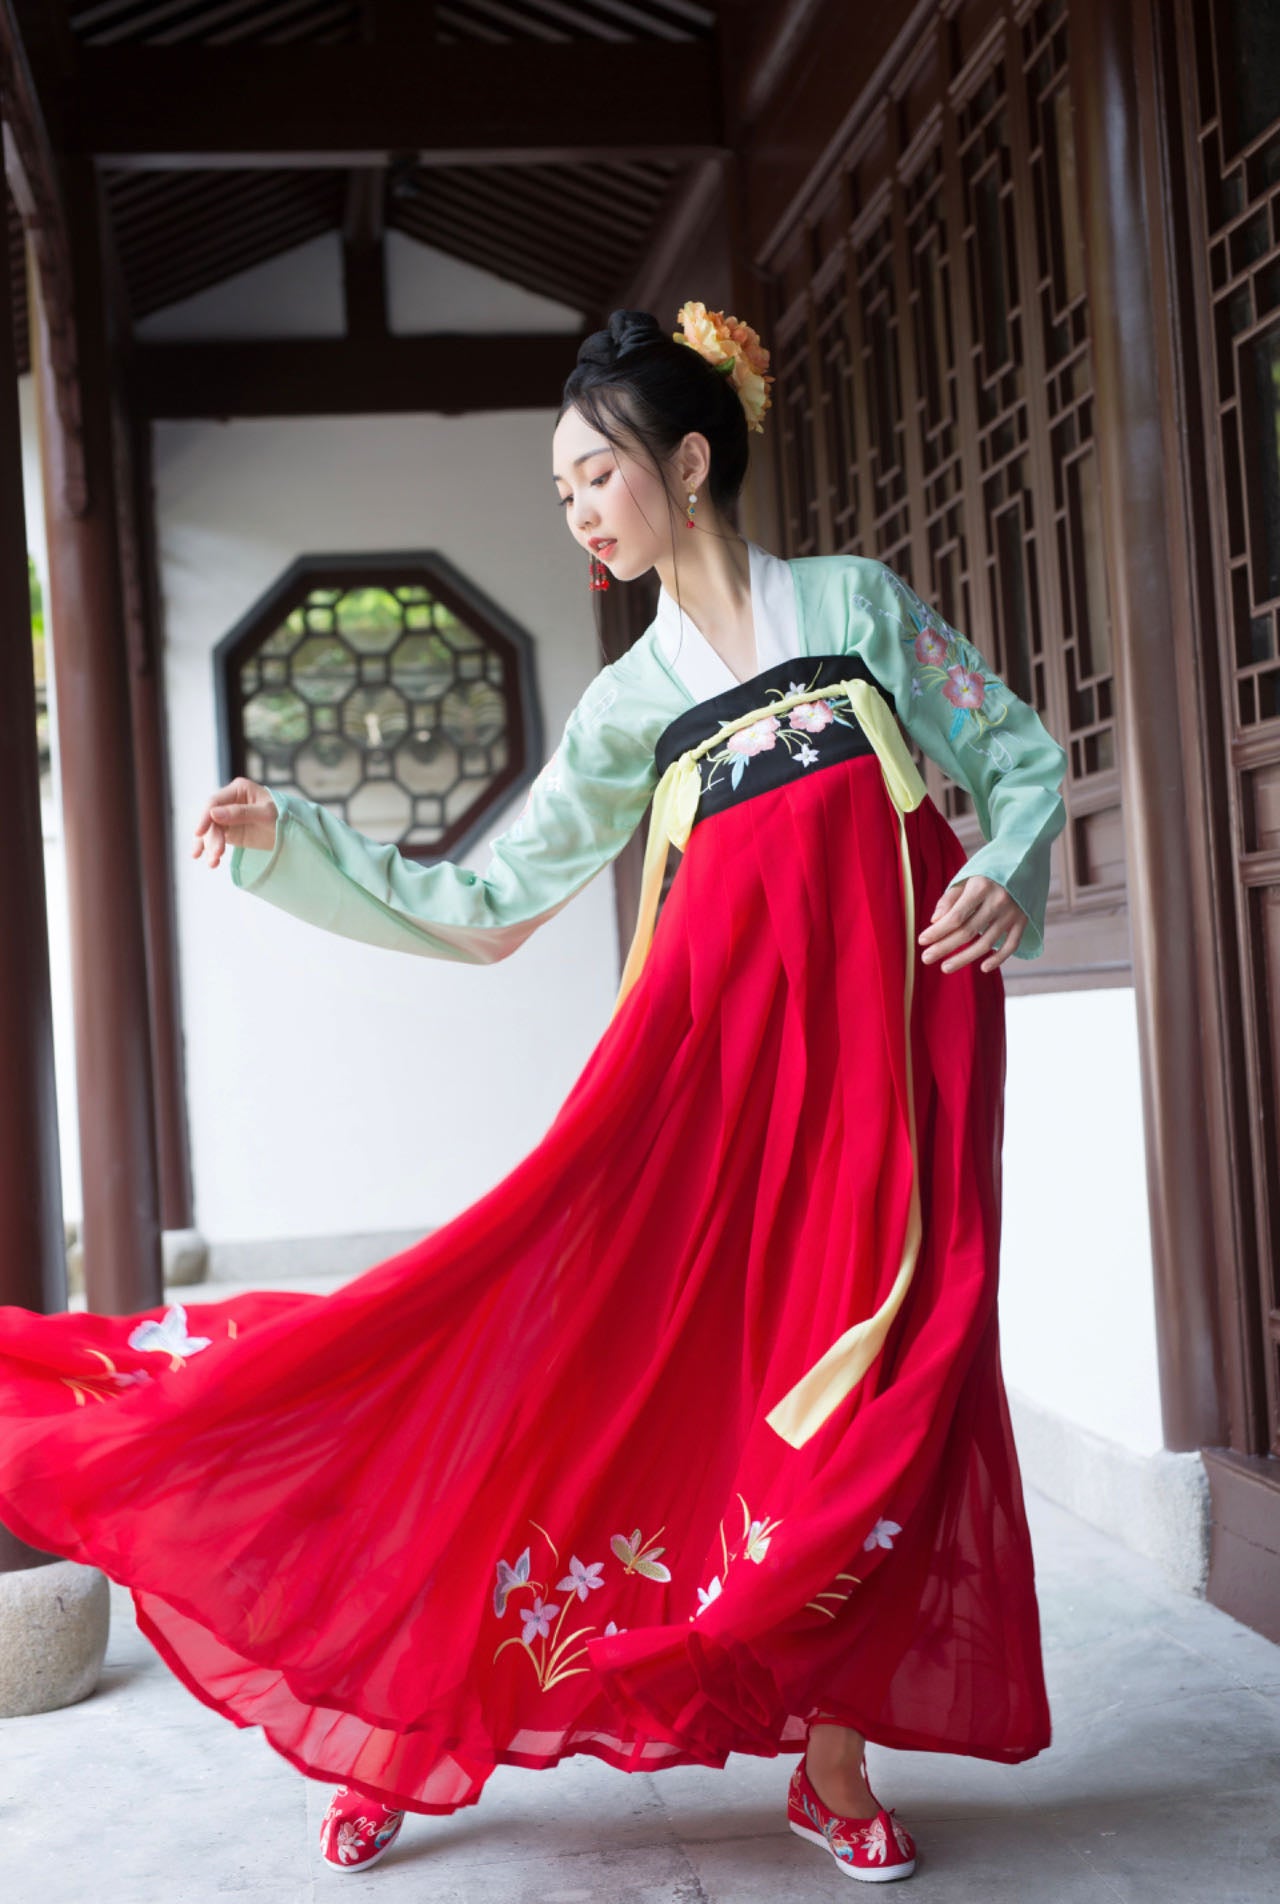 Enchanted Butterfly Elegance: Exquisite Hanfu Dress - A Cultural Masterpiece